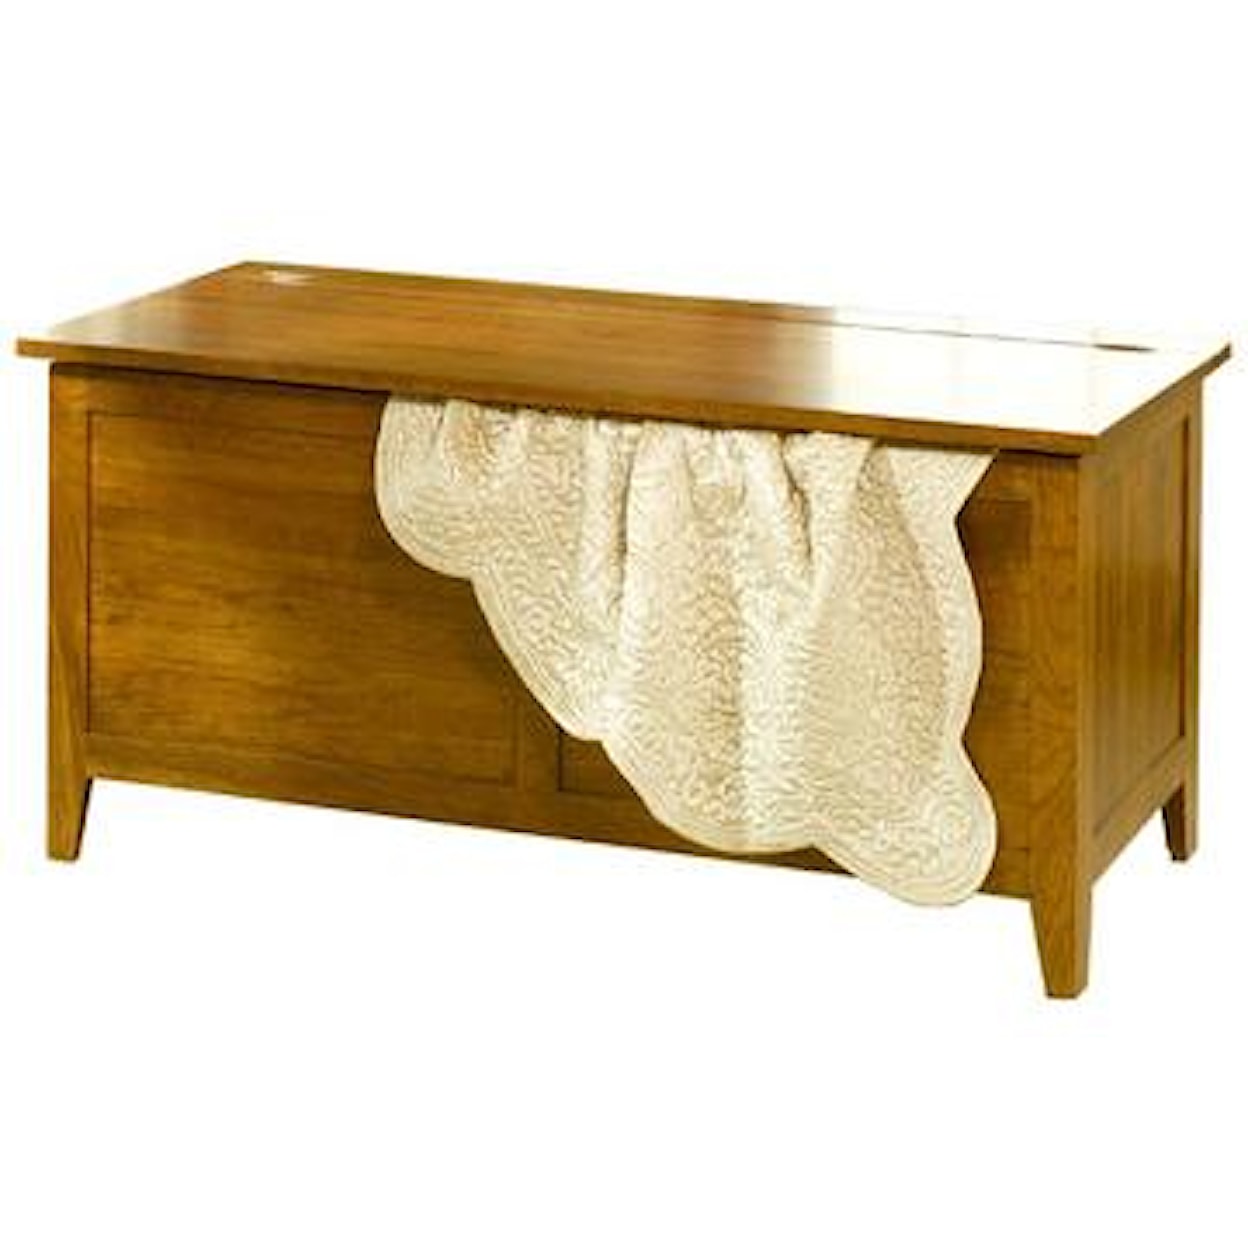 The Urban Collection Jamestown Square Blanket Chest